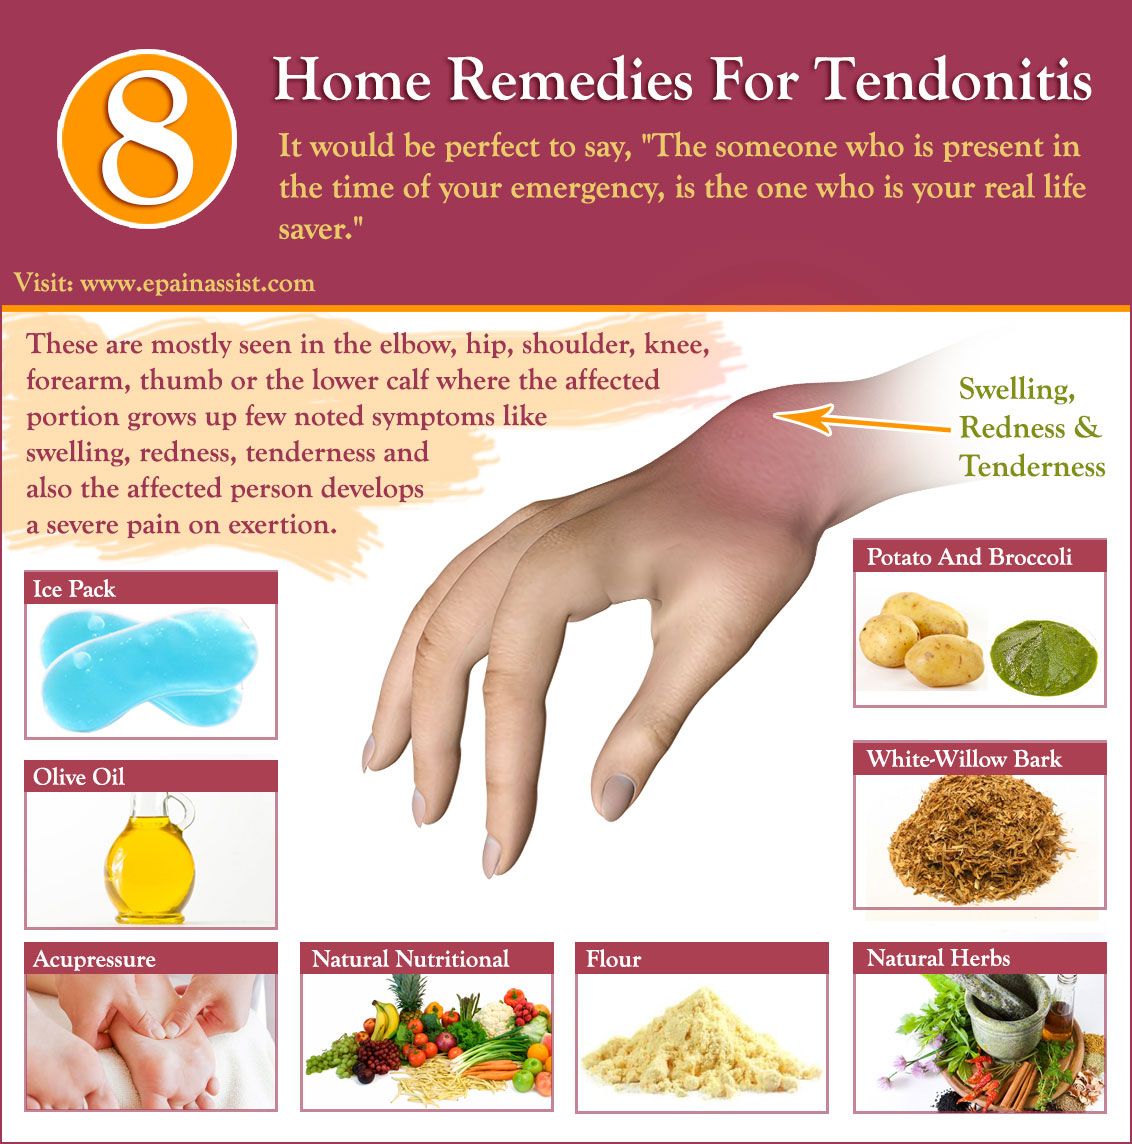 8 Home Remedies For Tendonitis